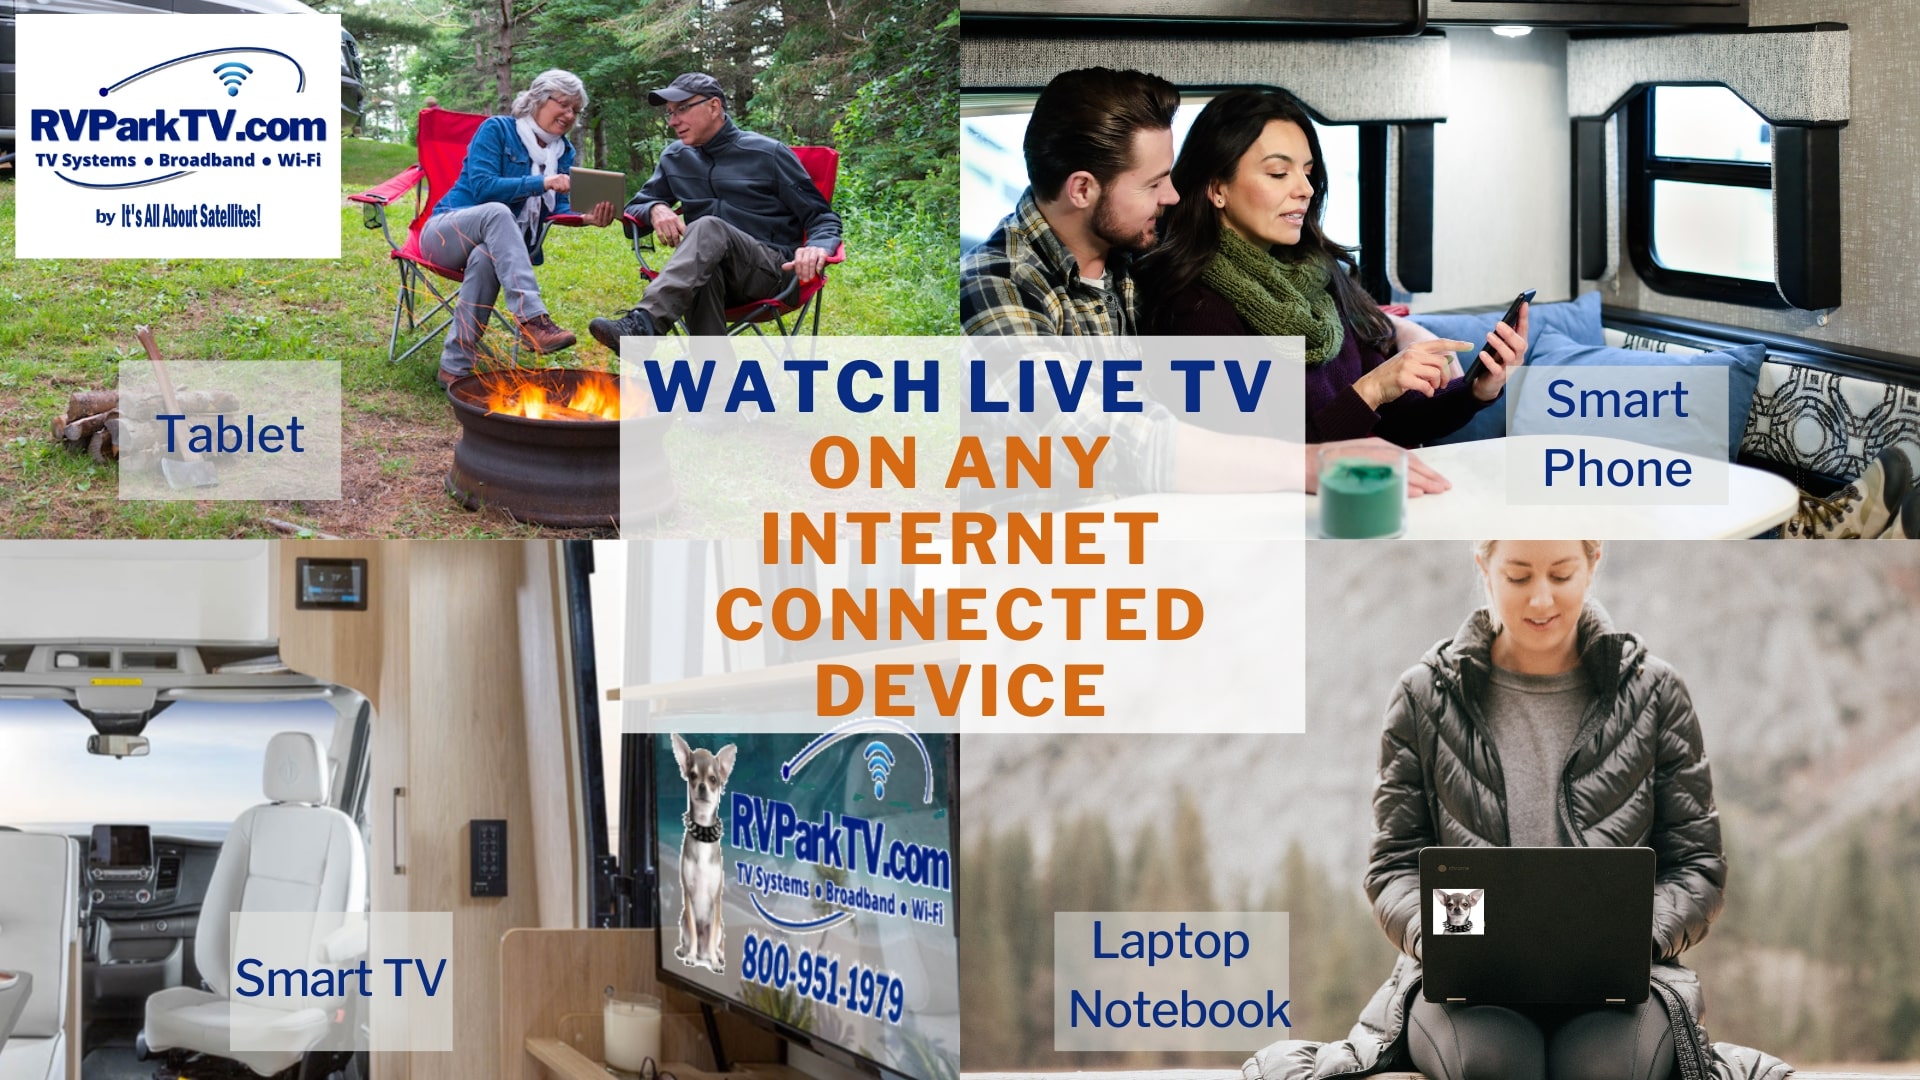 RVParkTV.com - TV Systems, WiFi Networks, and Blazing Fast Broadband Internet that Lets Your Campers Watch TV on Any Internet Connected Device